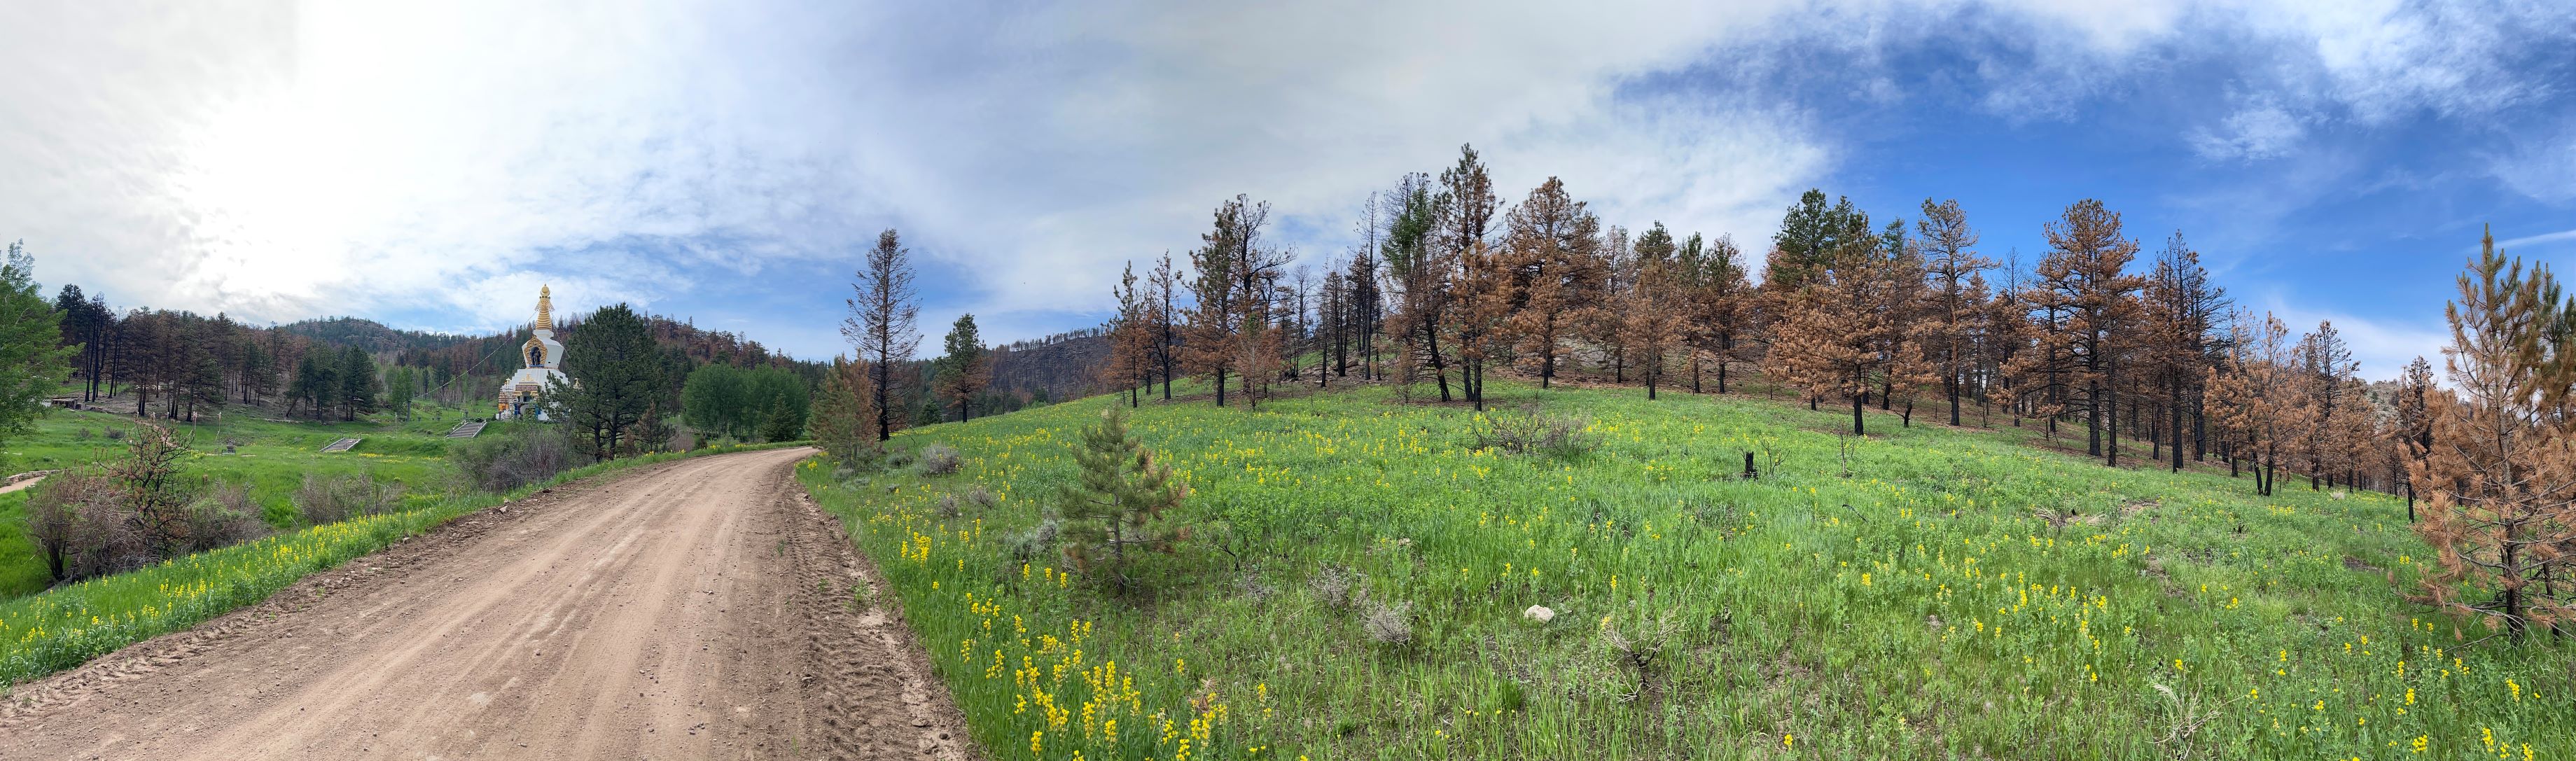 A picture showing a dirt road on the left side of the picture and a grassy meadow with trees, which looked to be charred/burned, in the background.